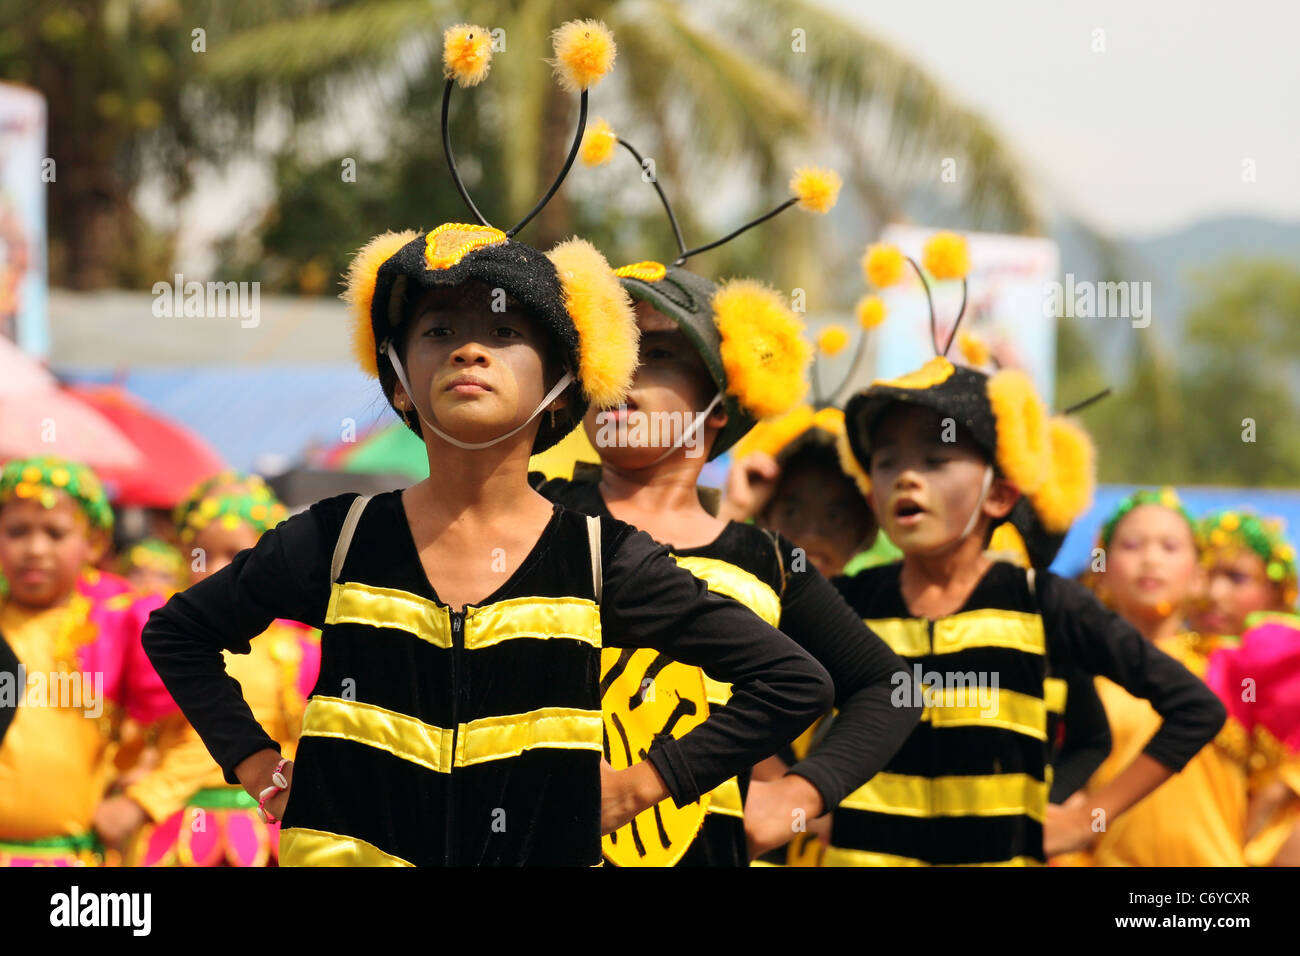 Dancing of children in bee costumes, portraying the history of Abuyog, Leyte, Philippines. Stock Photo